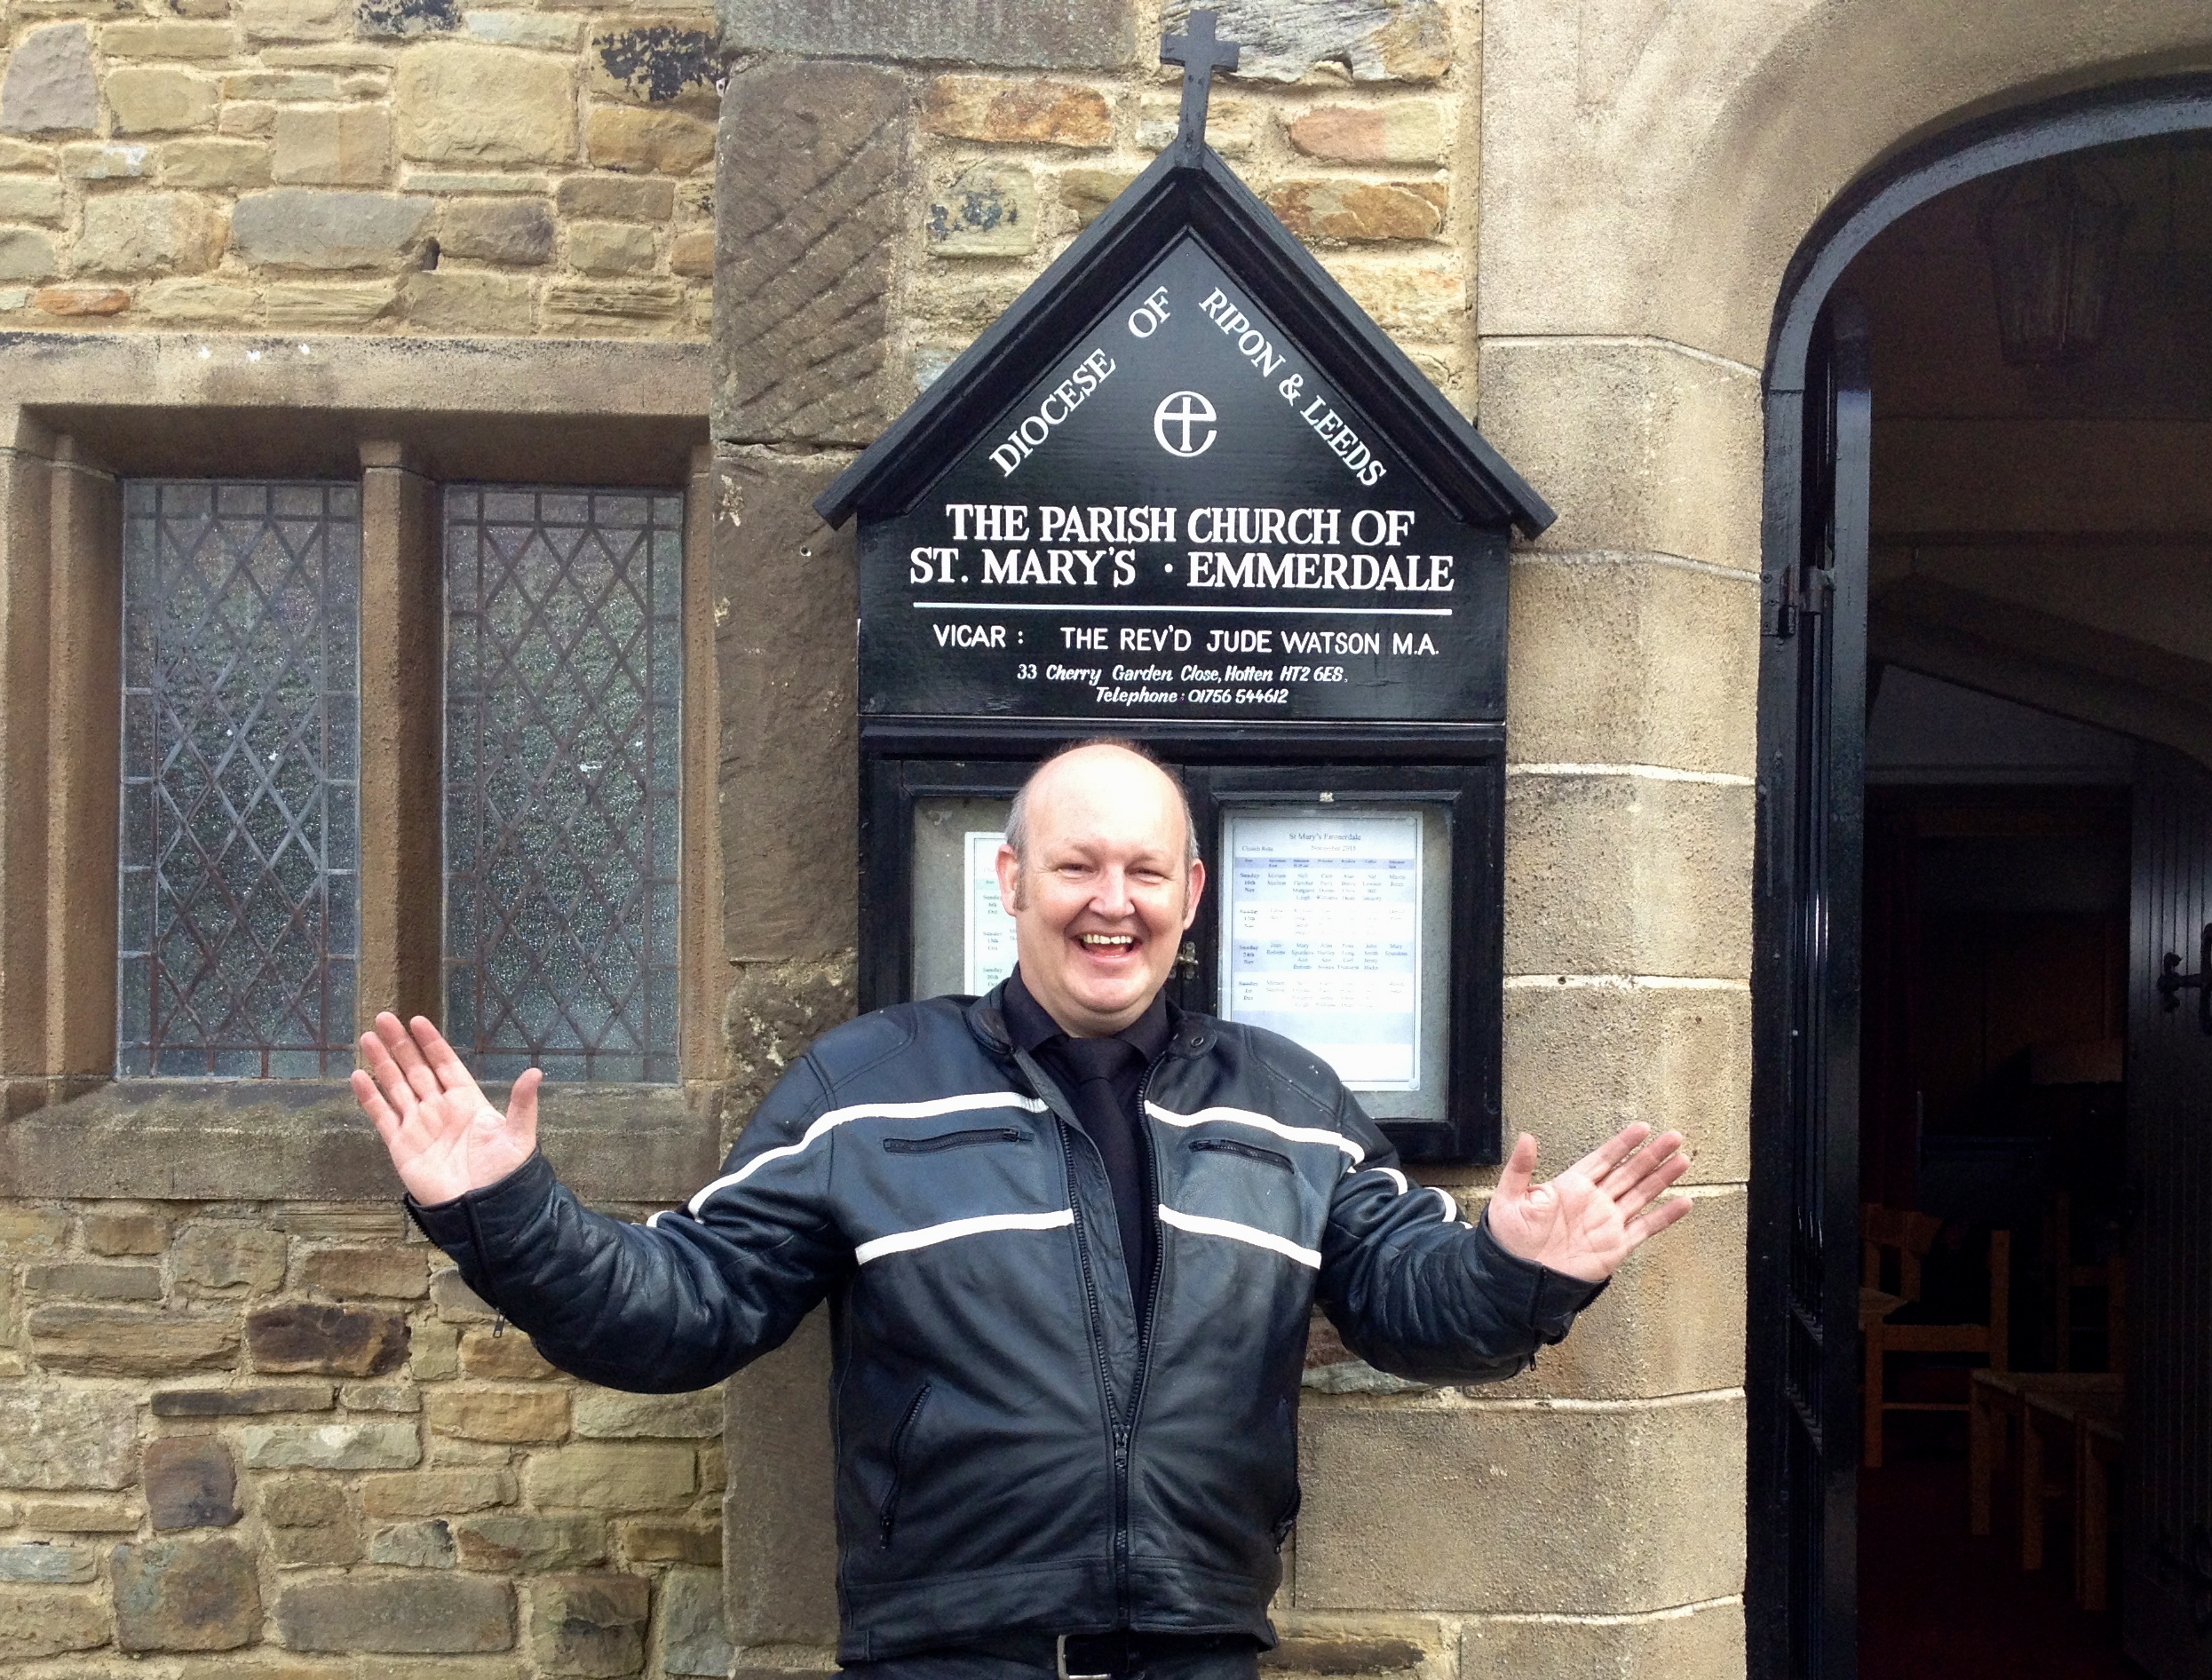 Emmerdale Church and The Faster Pastor